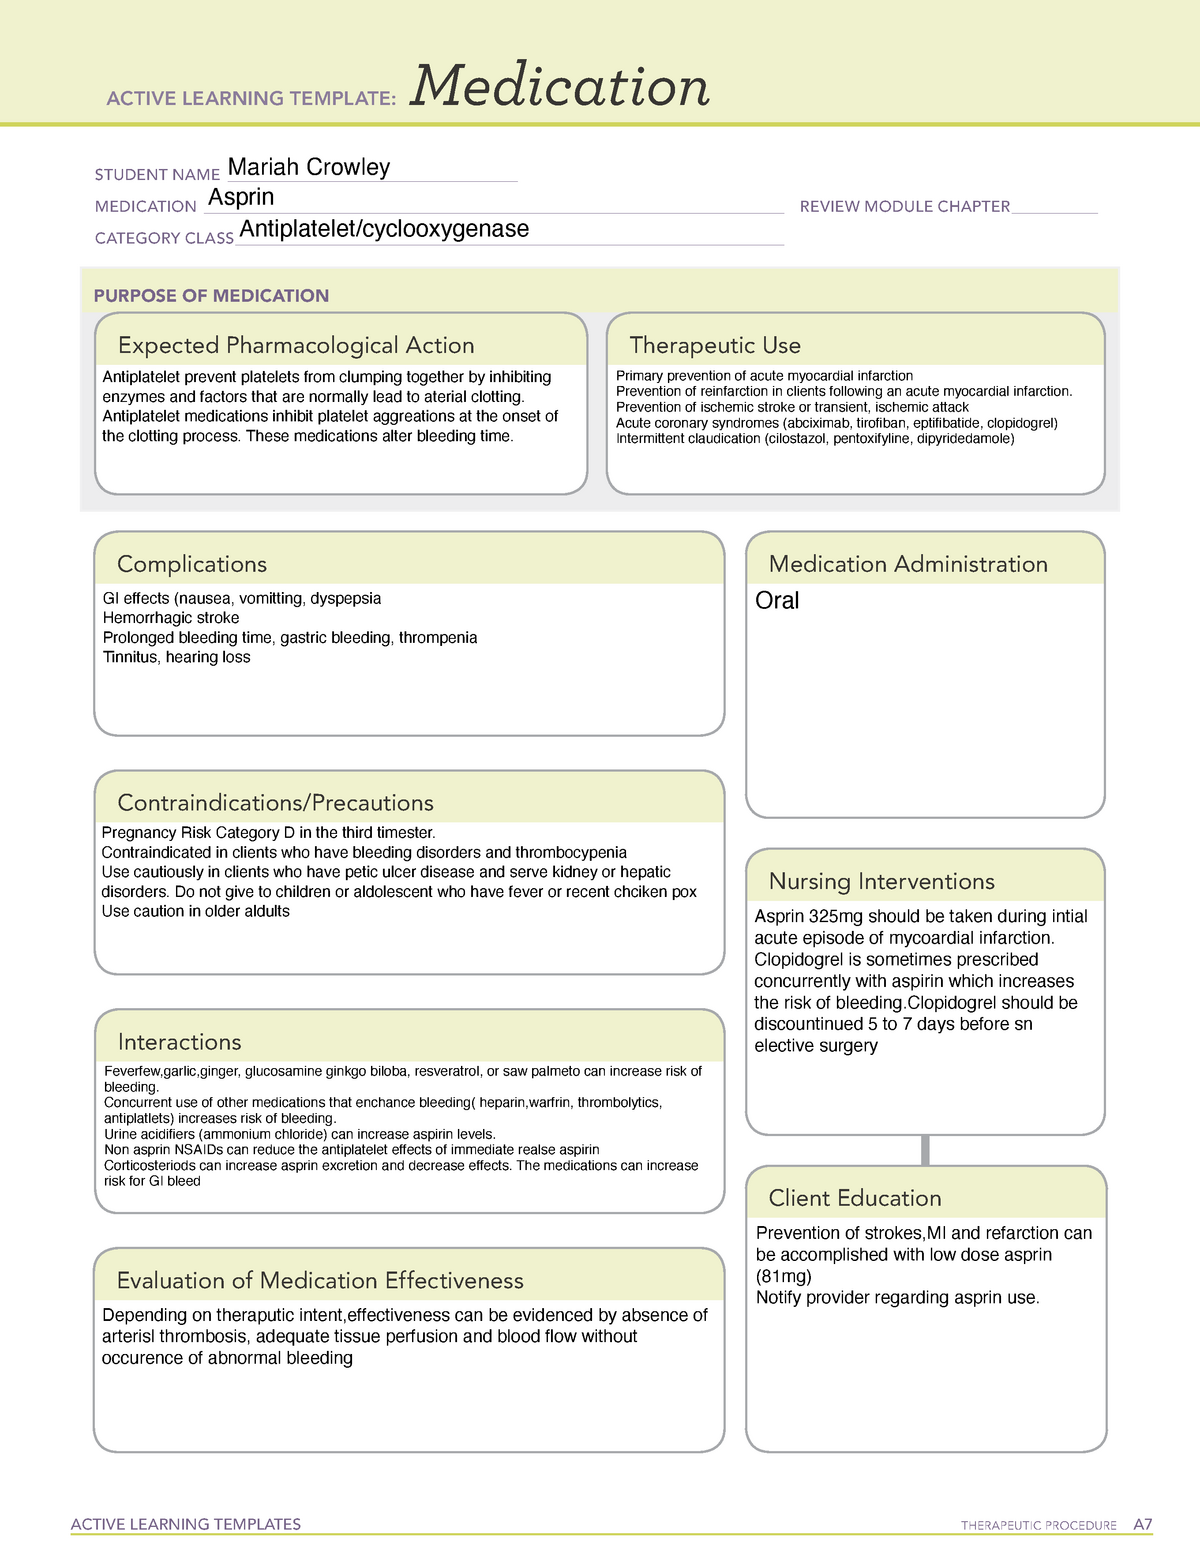 asprin-ati-medication-template-active-learning-templates-therapeutic